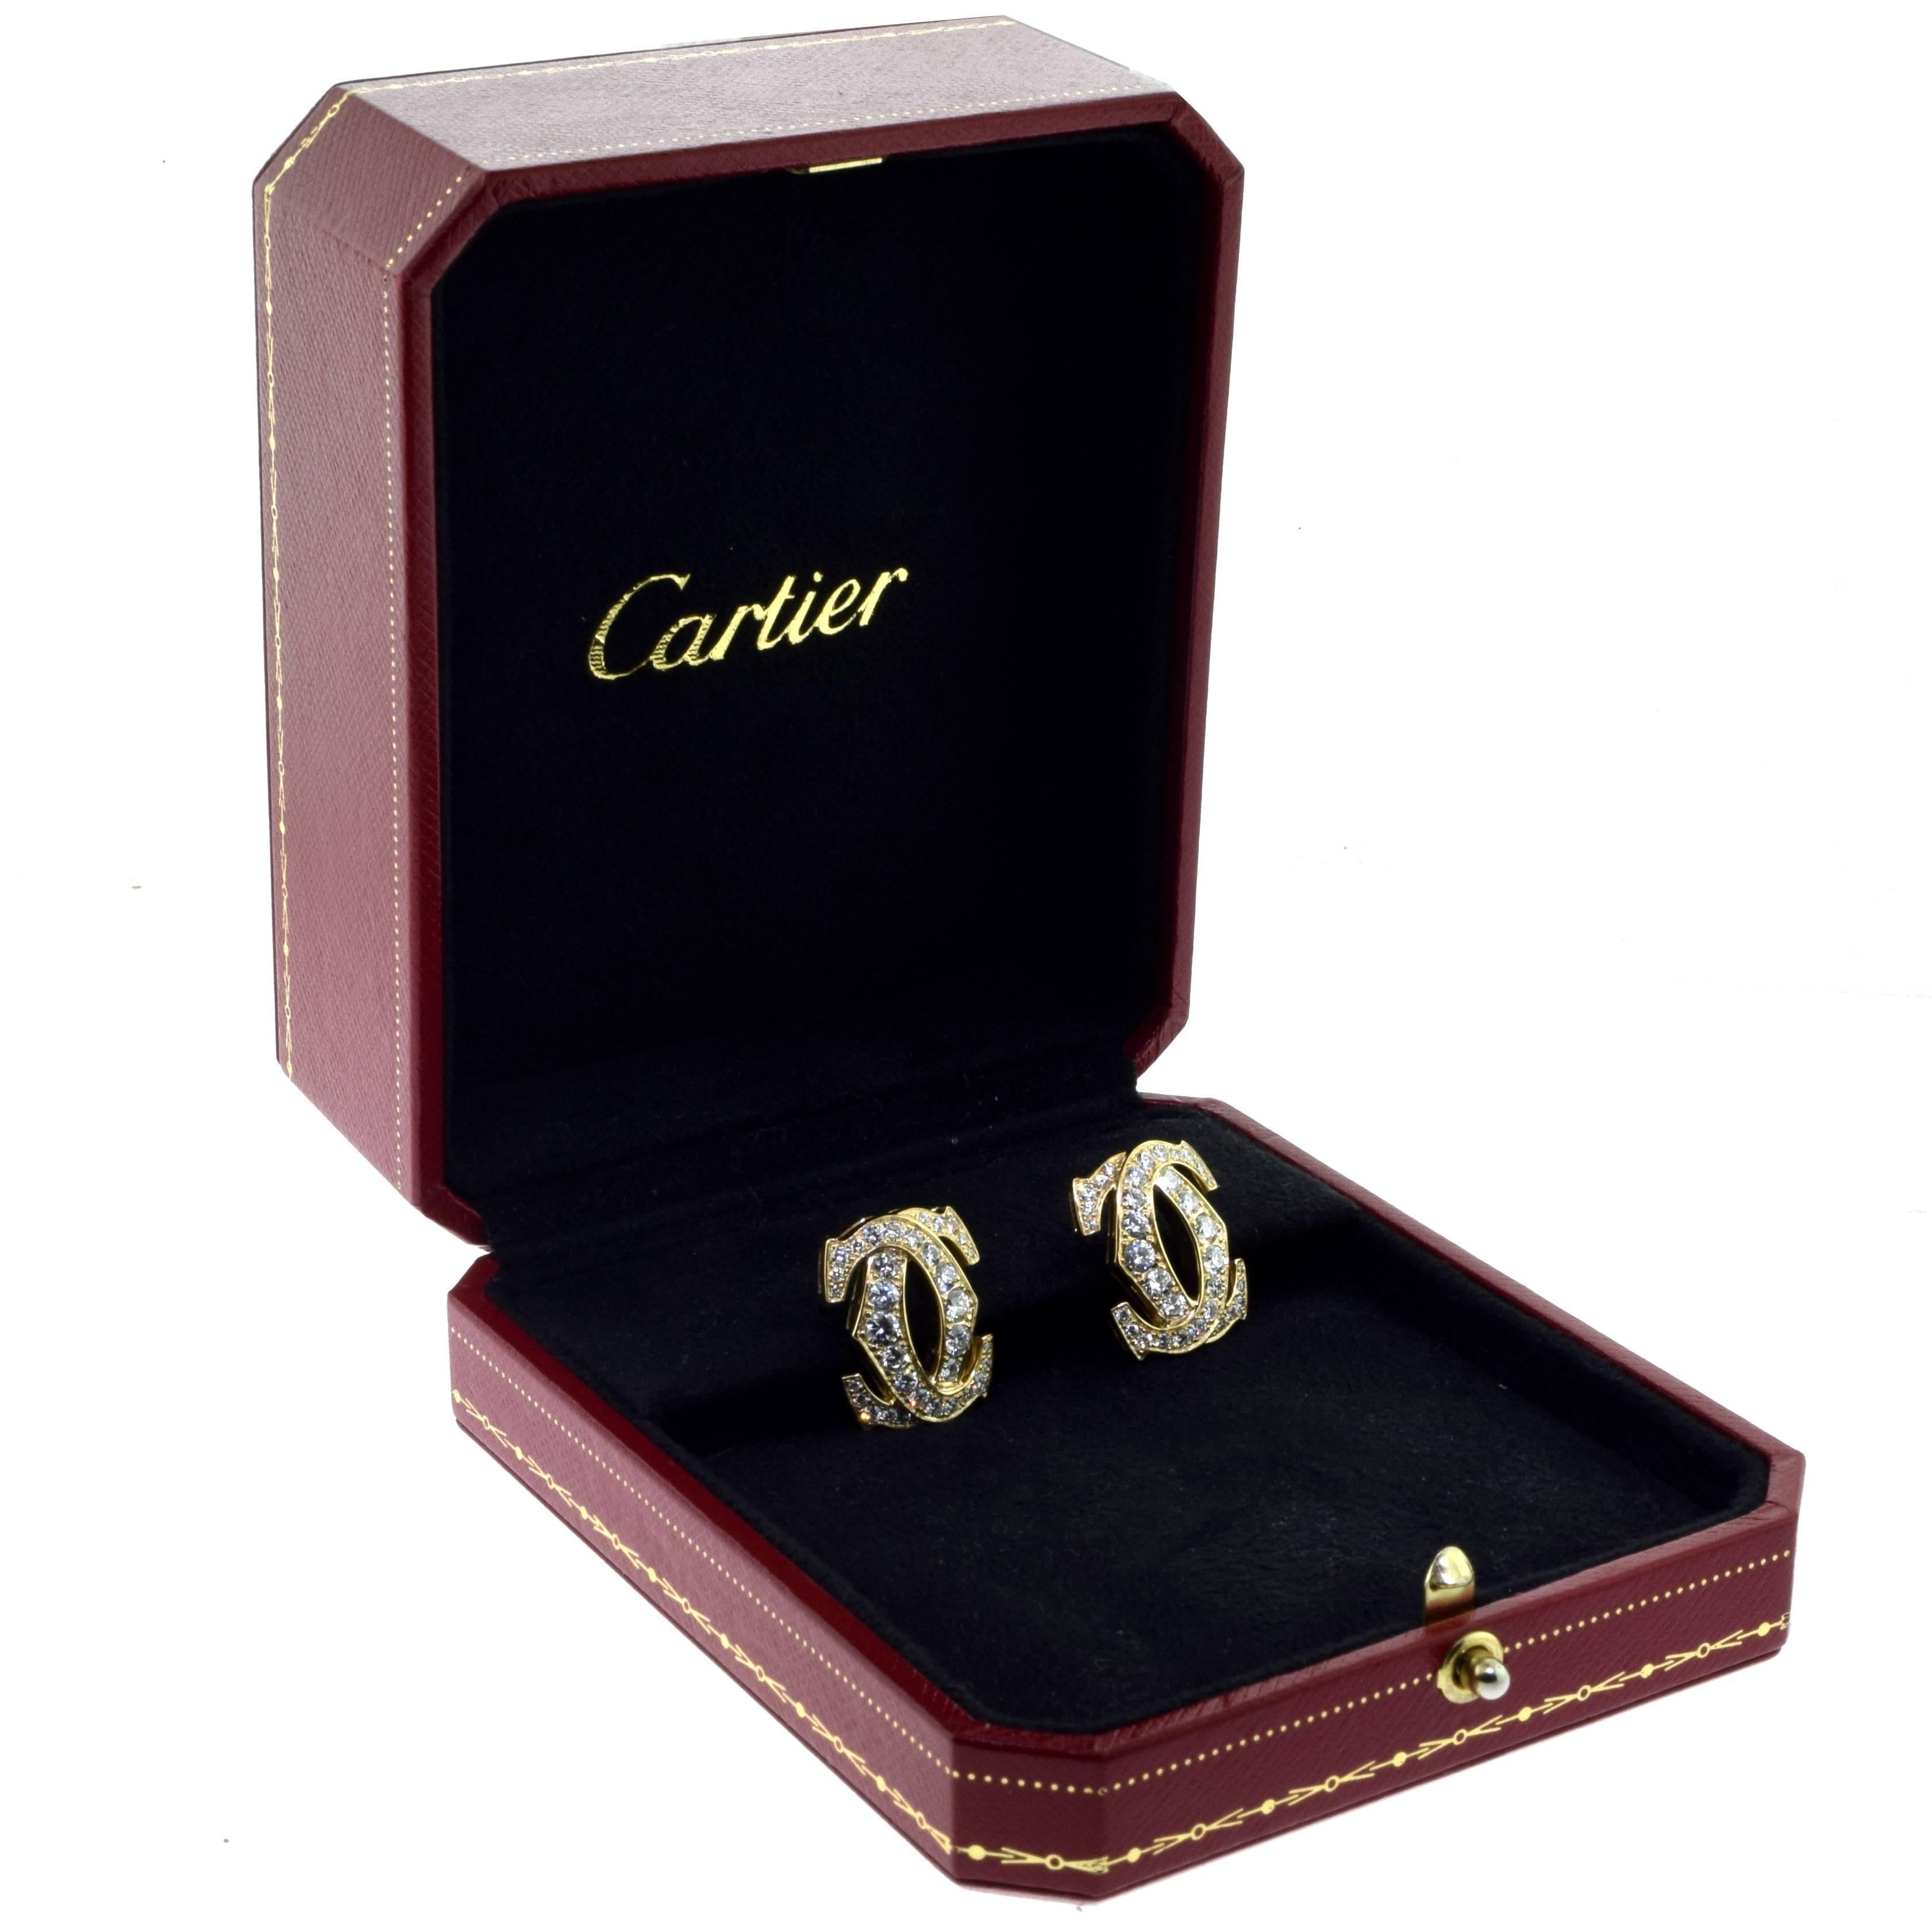 Designer: Cartier
Collection: Double C
Metal: Yellow Gold
Metal Purity: 18k
Stones: Brilliant Round Cut Diamonds
Total Carat Weight: 2.27 ct
Color / Clarity: E - F / VVS 
Dimensions: 20.55 x 16.19 mm
Total Item Weight (g): 14.0
Hallmark: Cartier